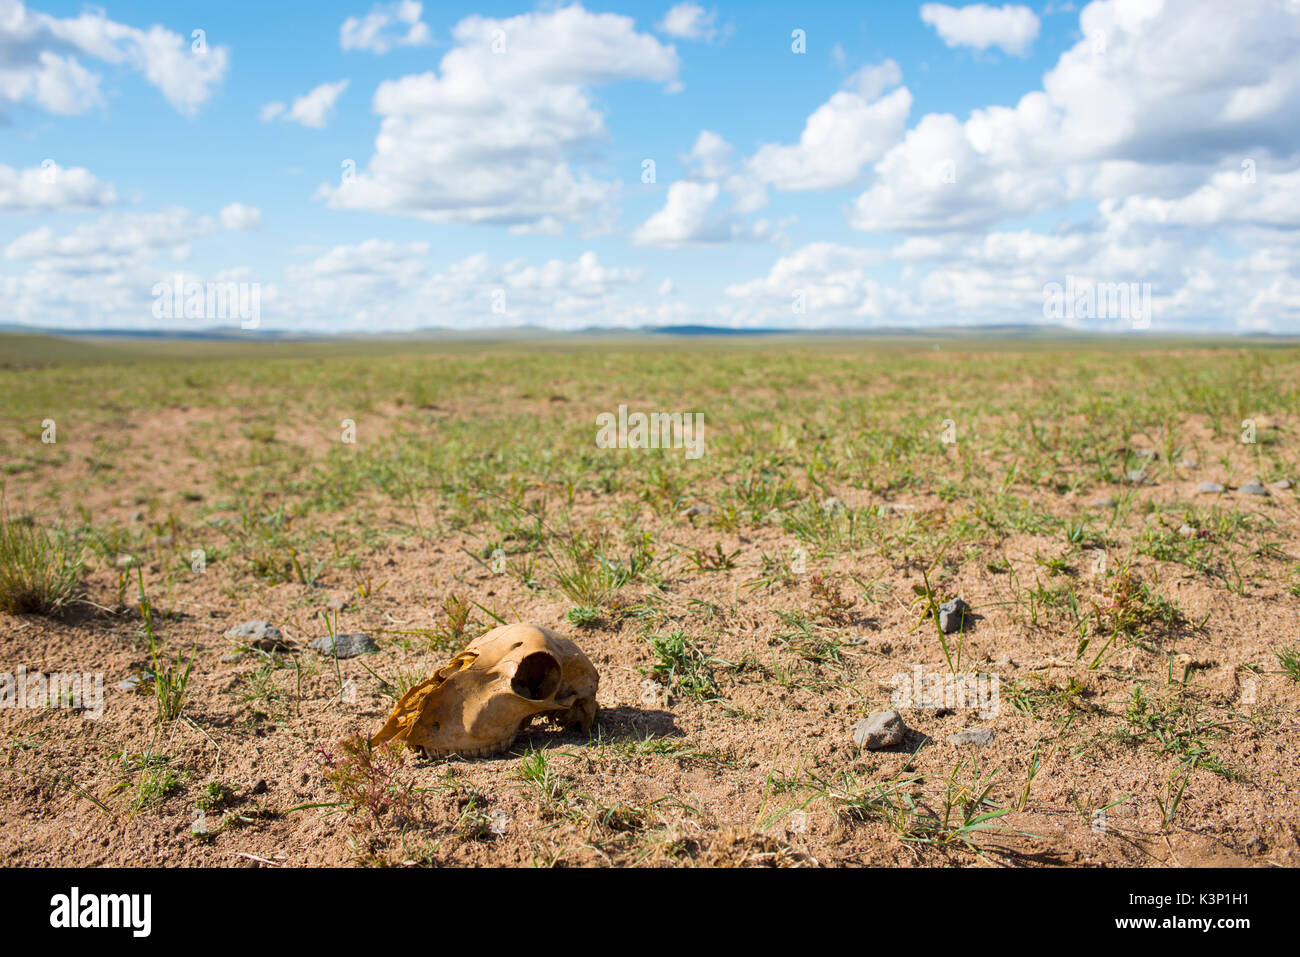 Dramatic scene of the skull of an animal lying on the ground Stock Photo